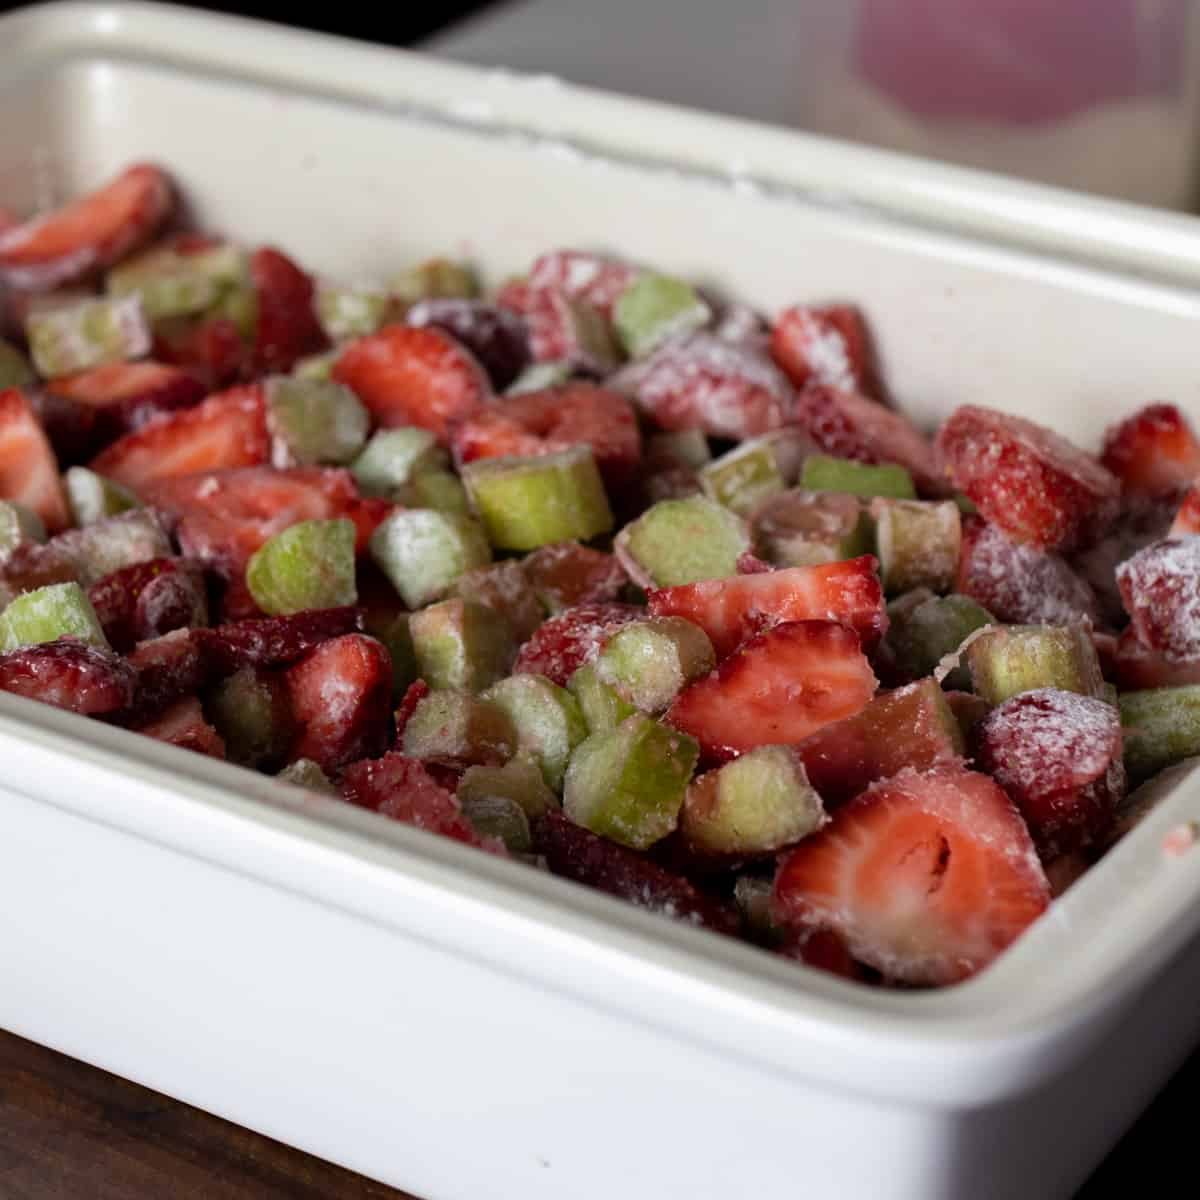 Raw rhubarb and strawberries sliced and mixed with sugar and flour in a baking dish.